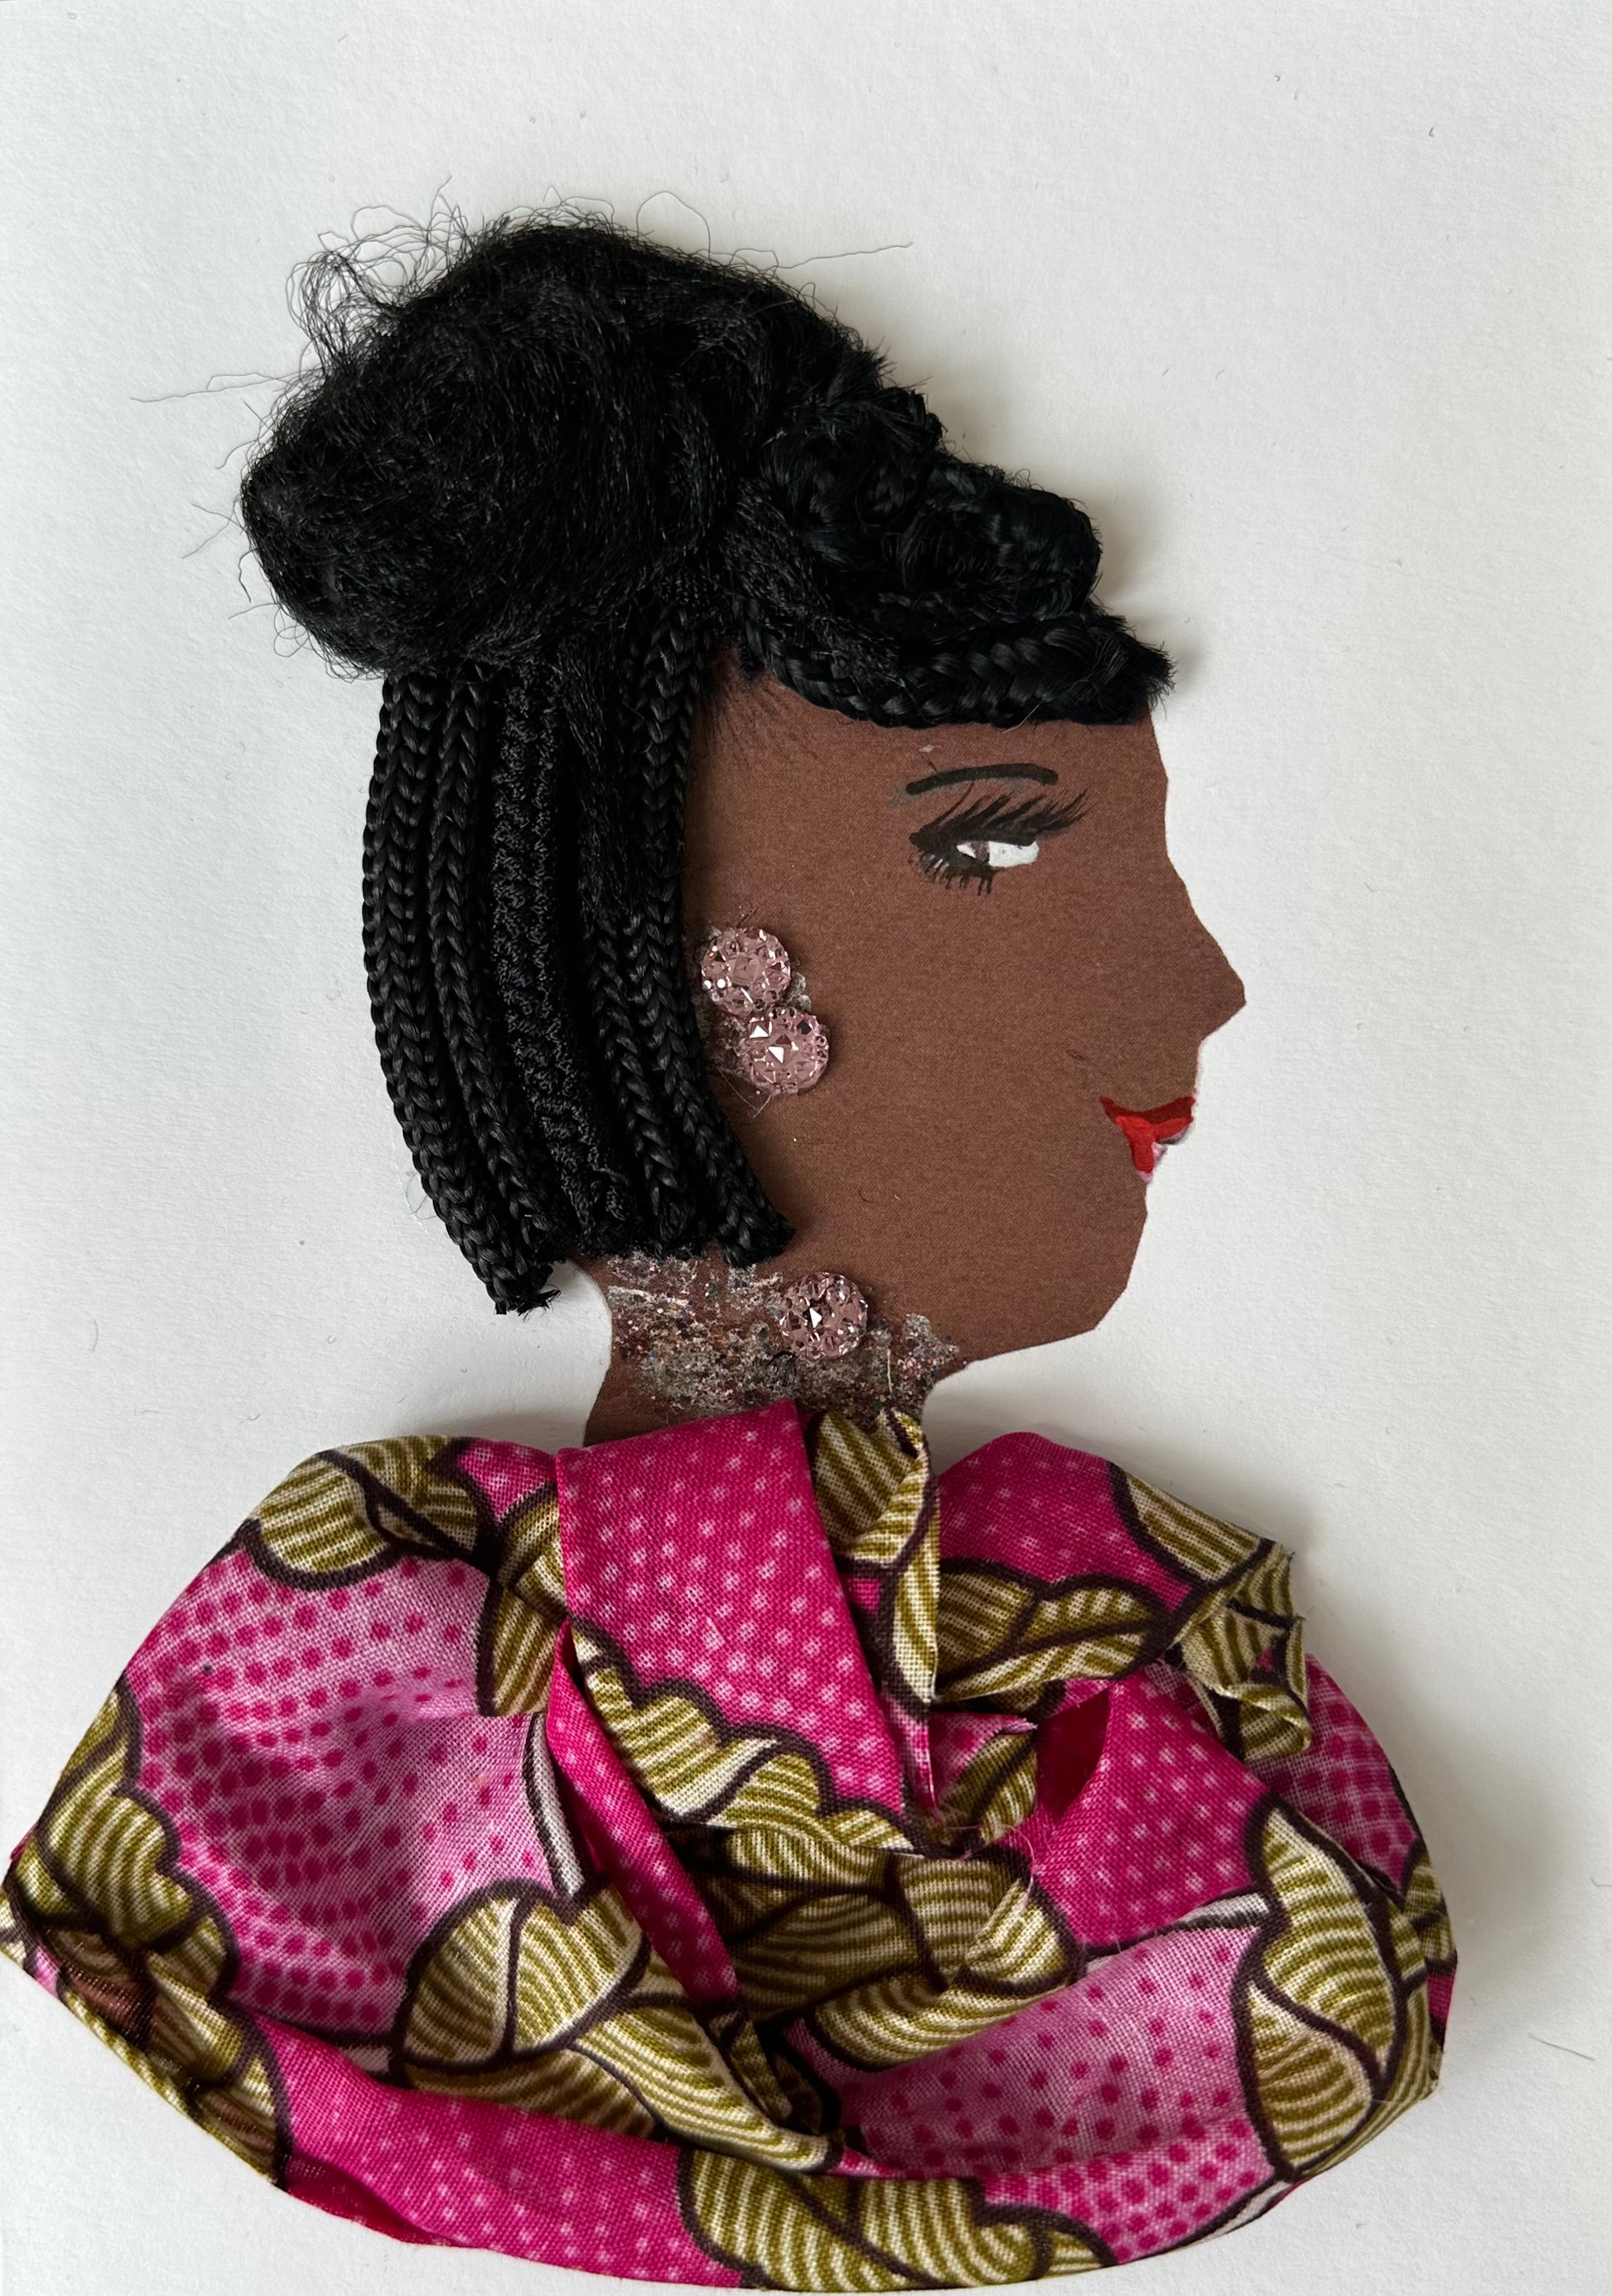 I designed this handmade card of a woman wearing a pink patterned blouse with walnut coloured accents. Her earrings and necklace match with the soft pink colour. 